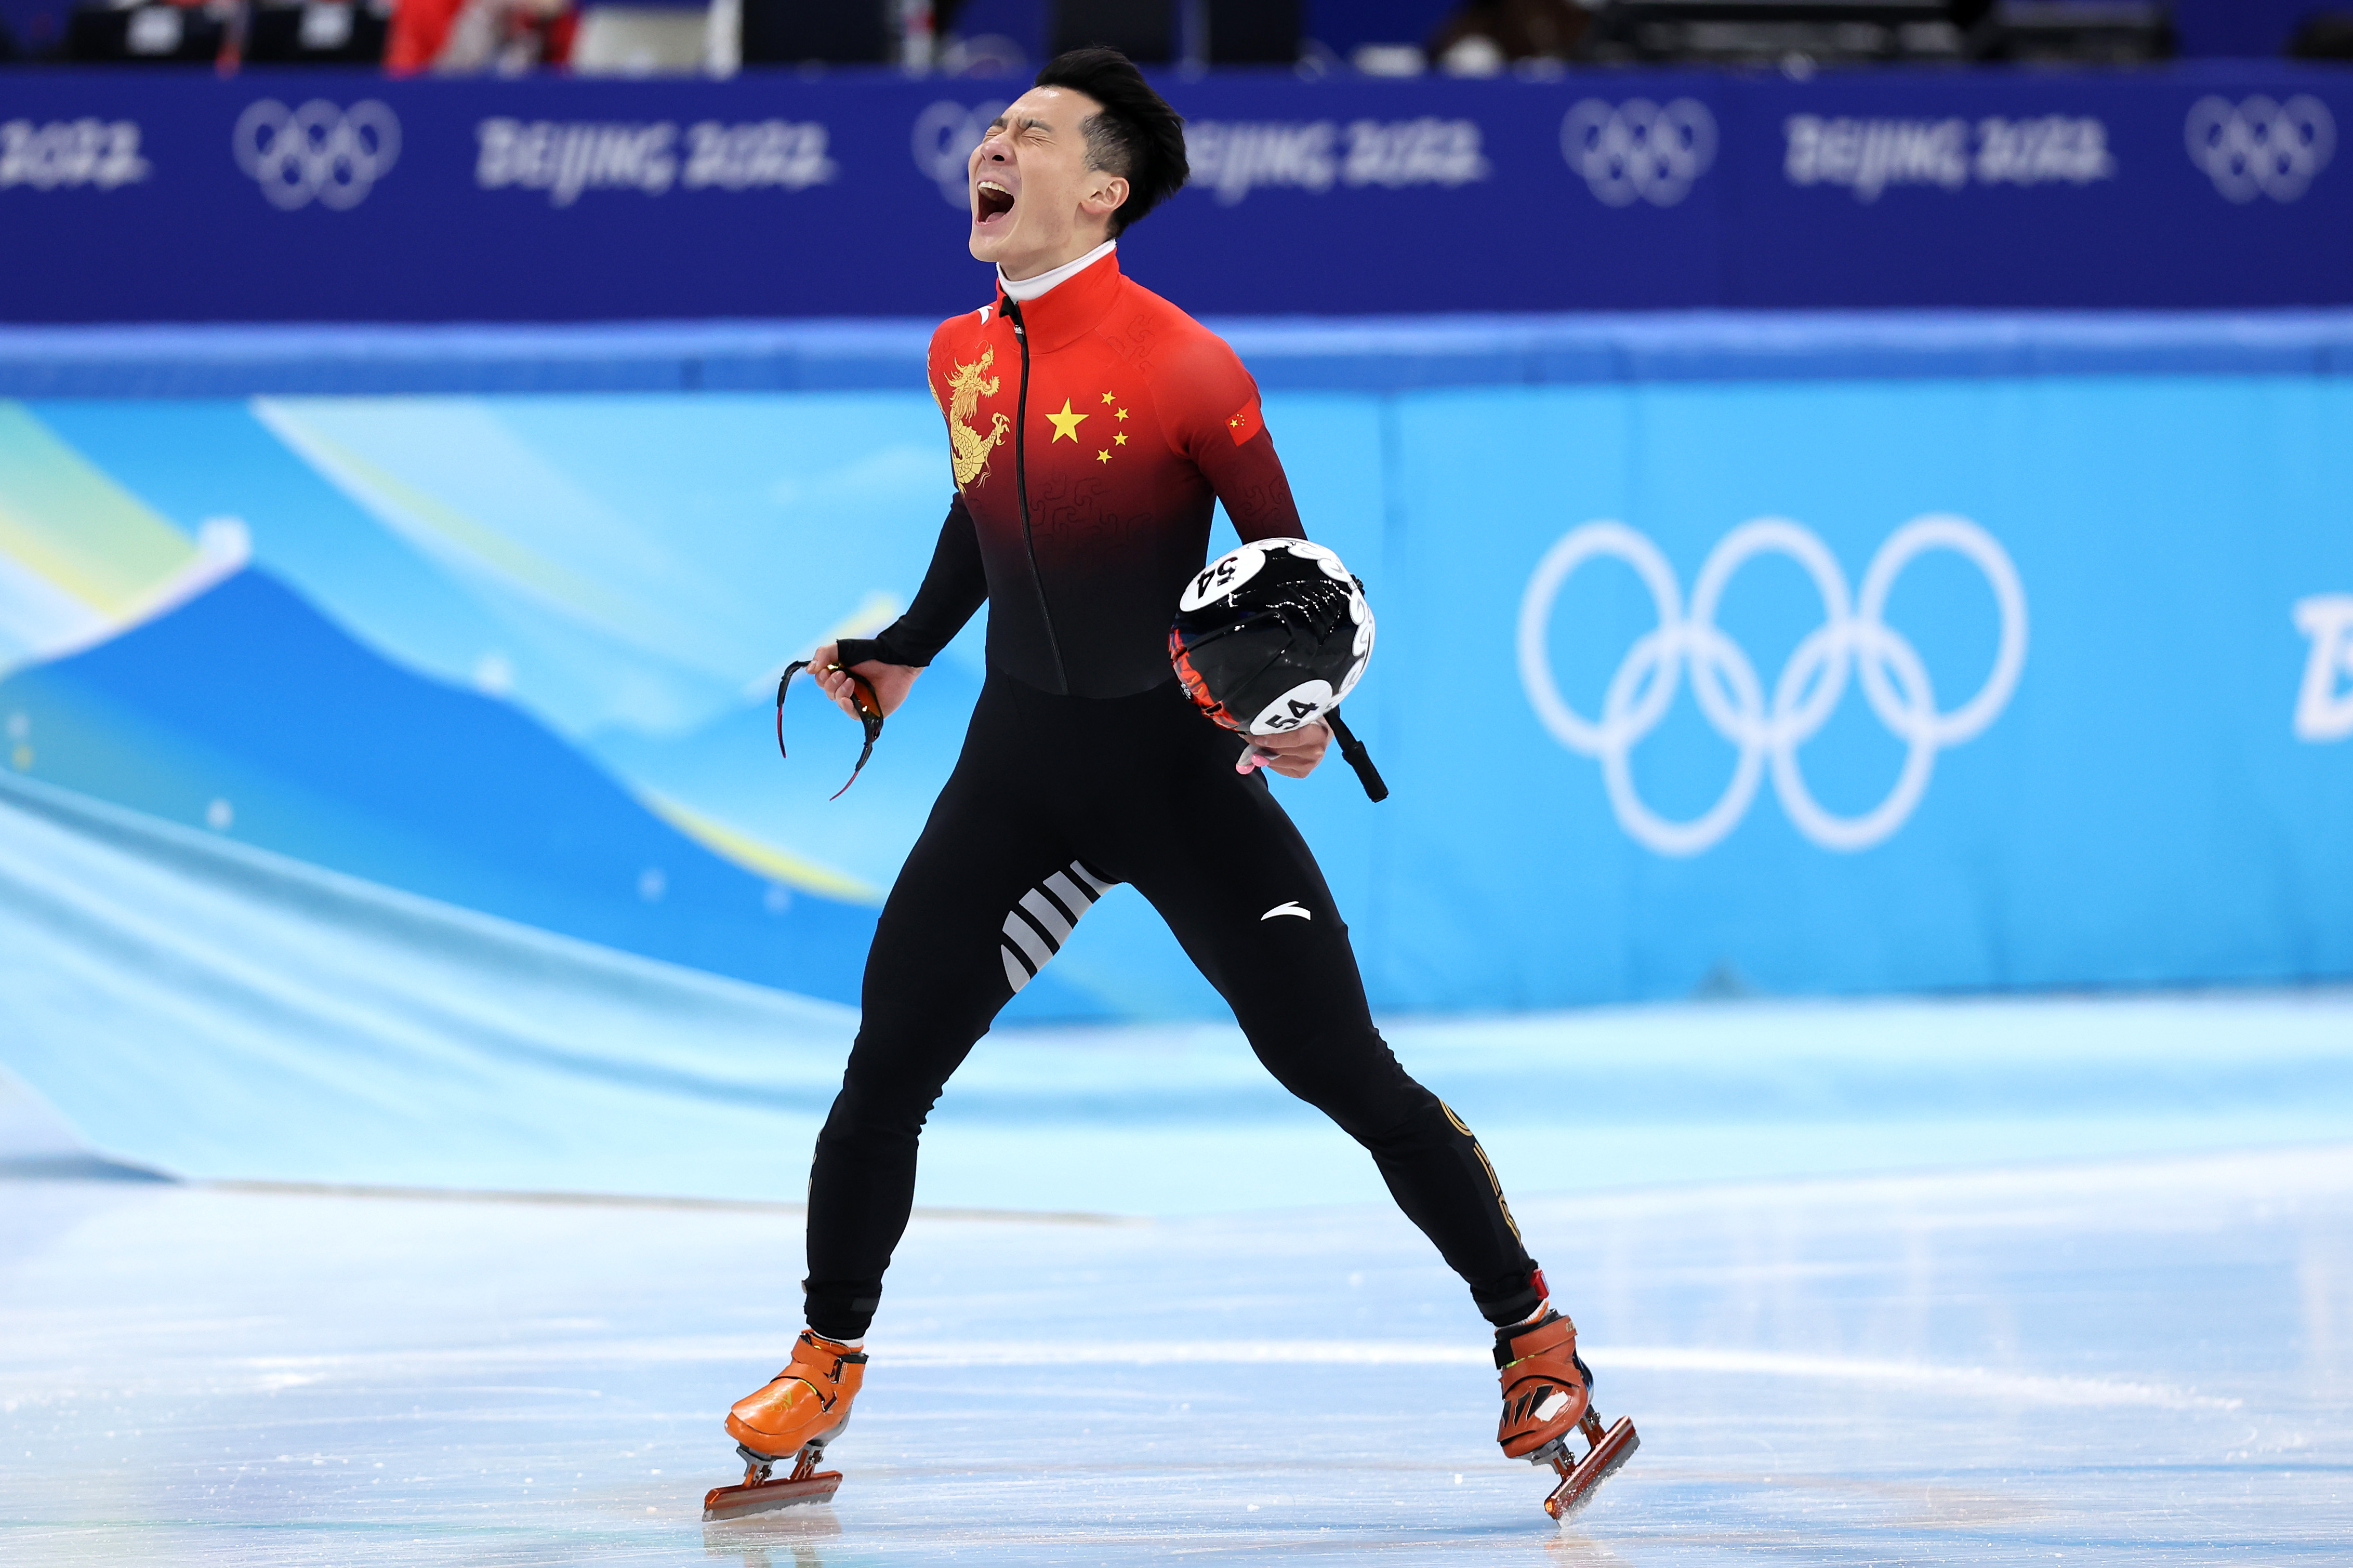 China's Ren Ziwei celebrates winning the gold medal after the men's 1,000m short track speed skating final on February 7.